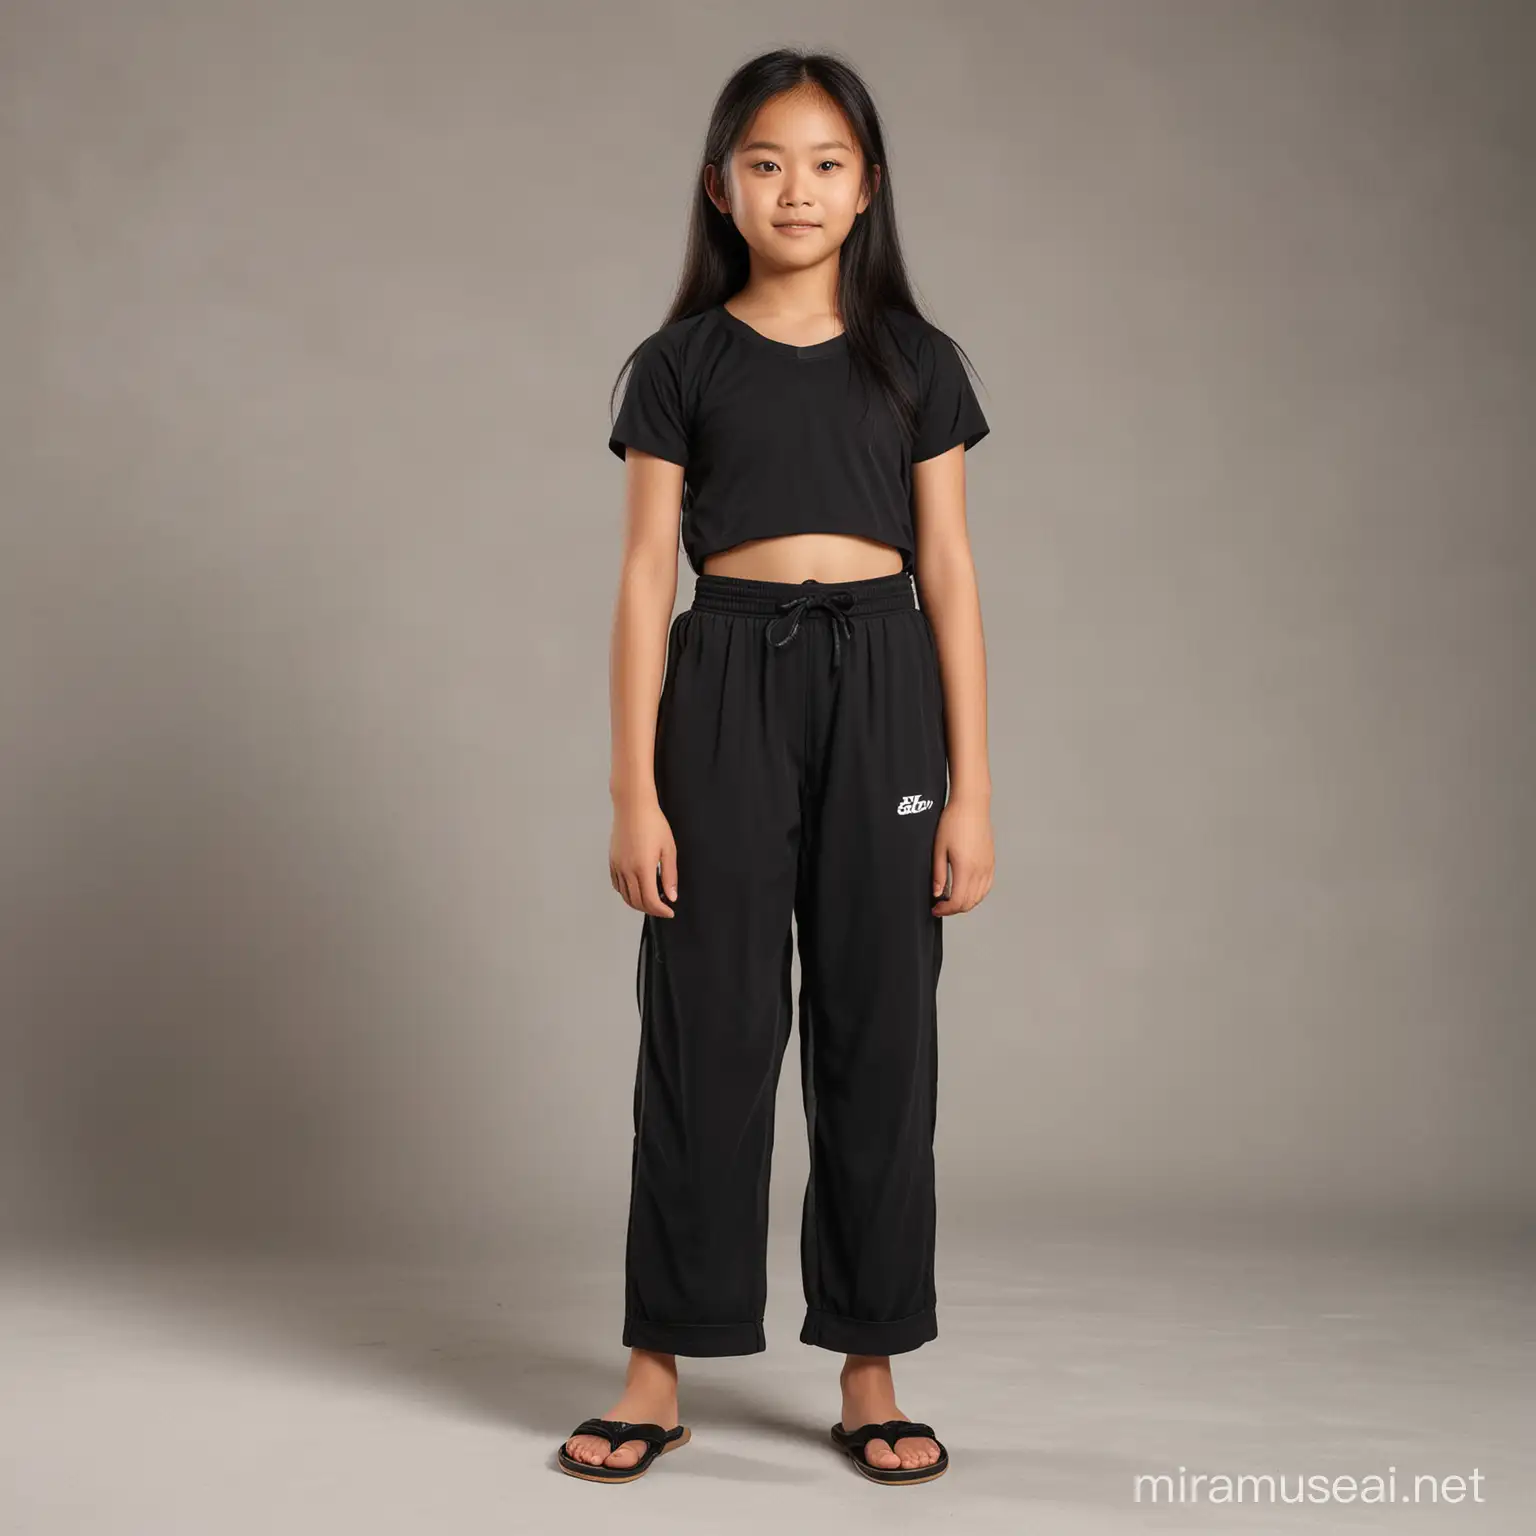 Young Gymnast Cho Chang in Black Sports Attire